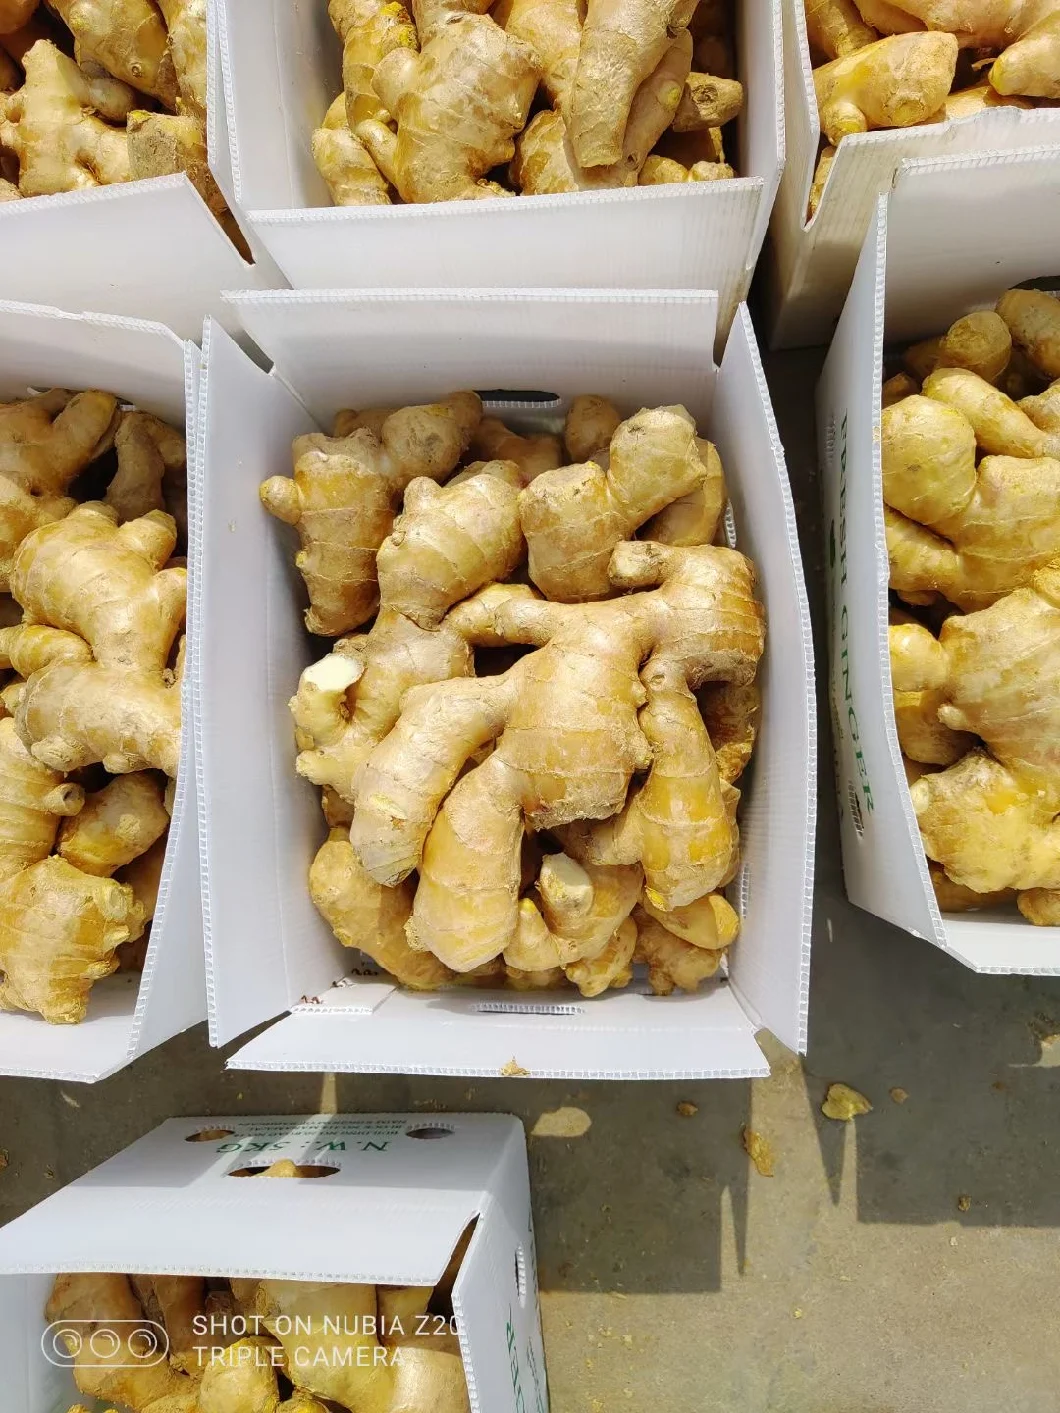 Chinese Selected Organic Yellow Air Dry Ginger 160g up on 220g